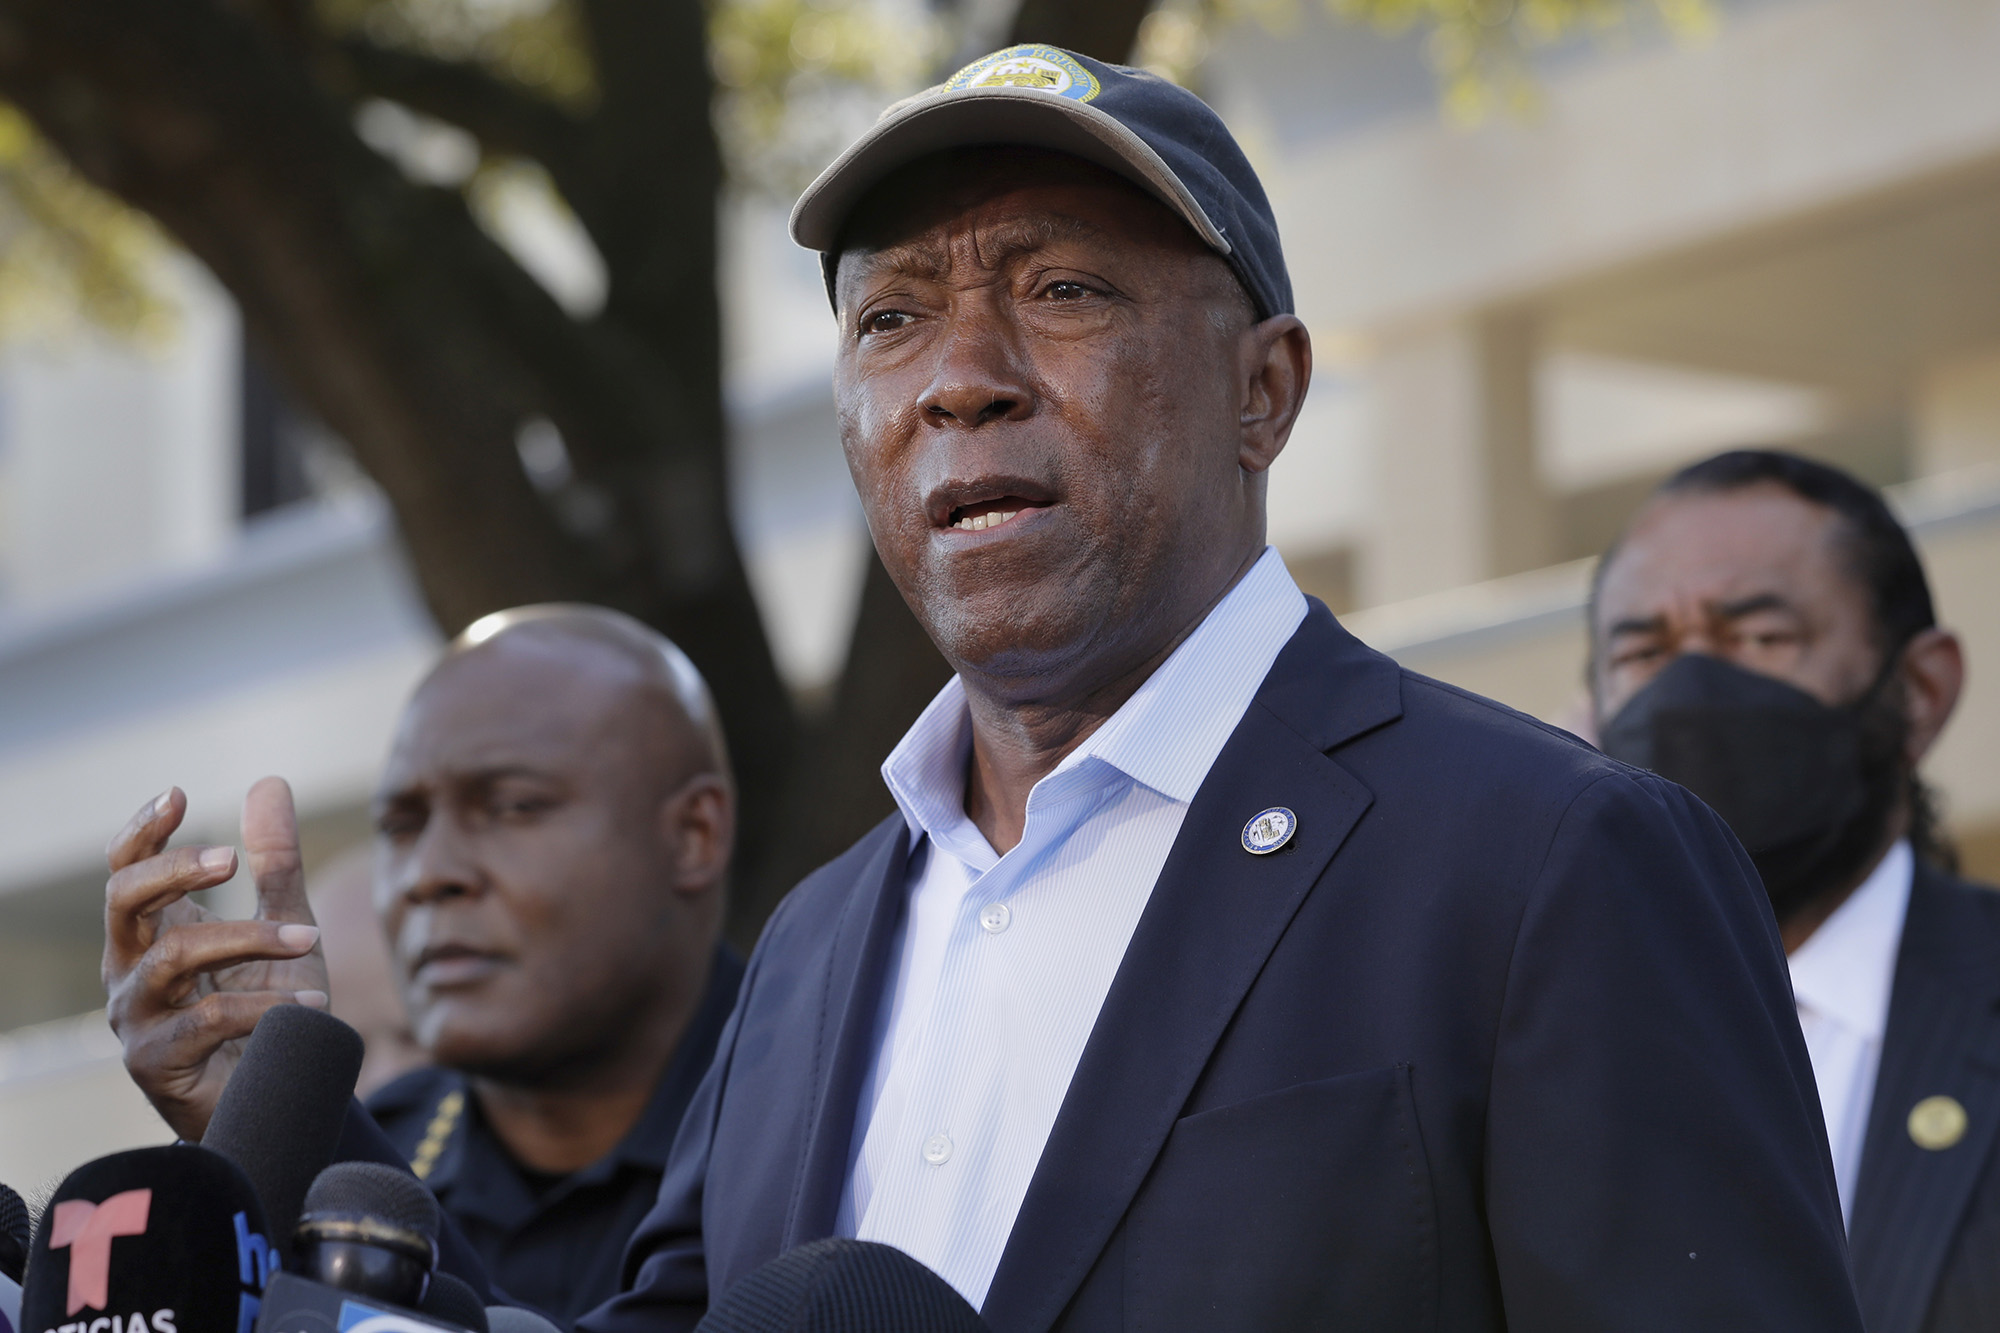 Houston Mayor Sylvester Turner speaks at a press conference after several people died and scores were injured during a music festival the night before.